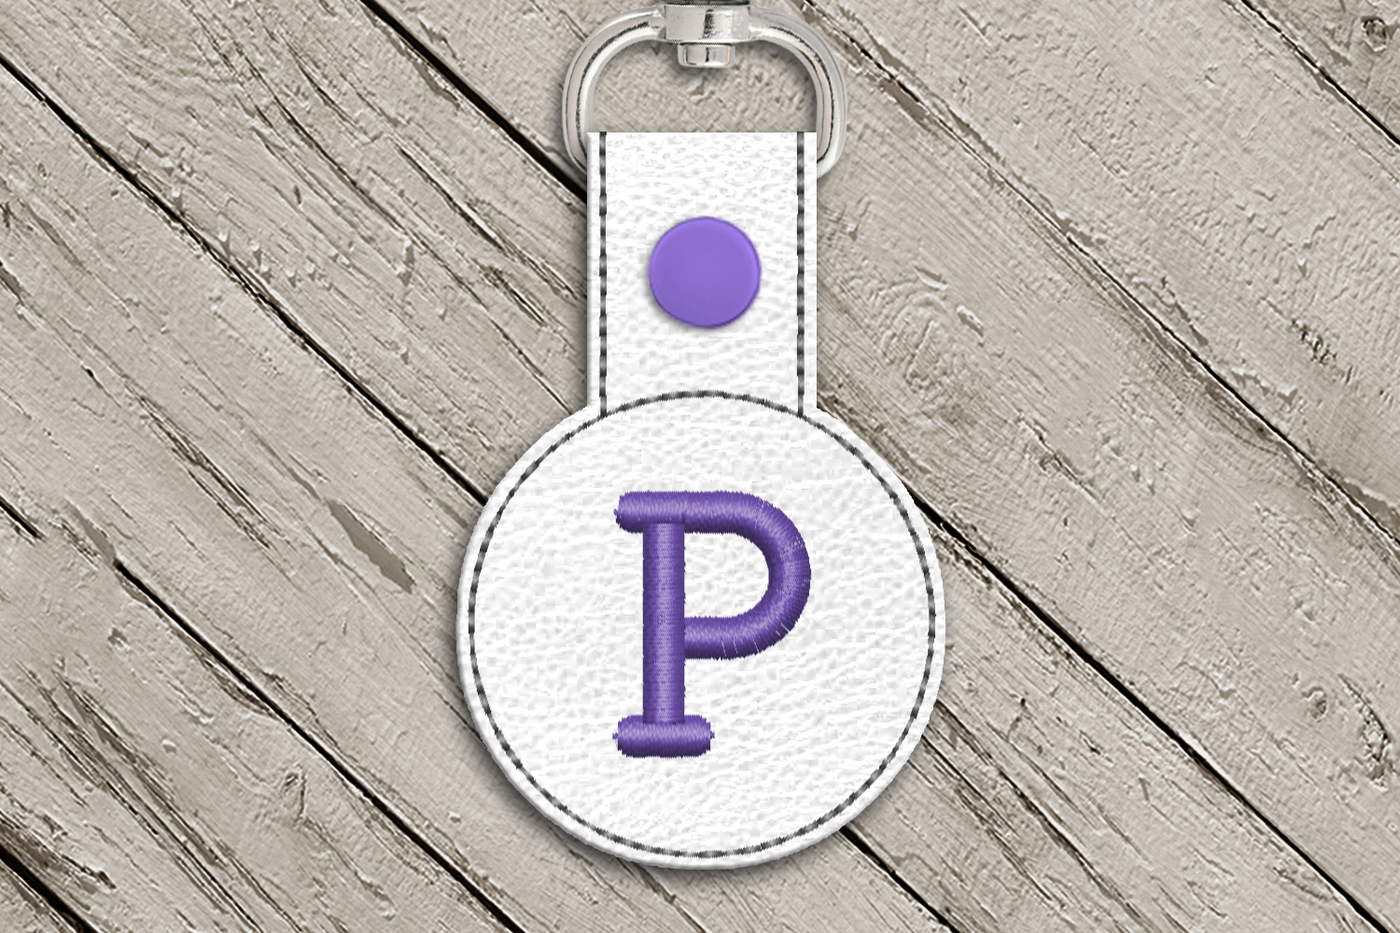 Letter P in the hoop key fob design